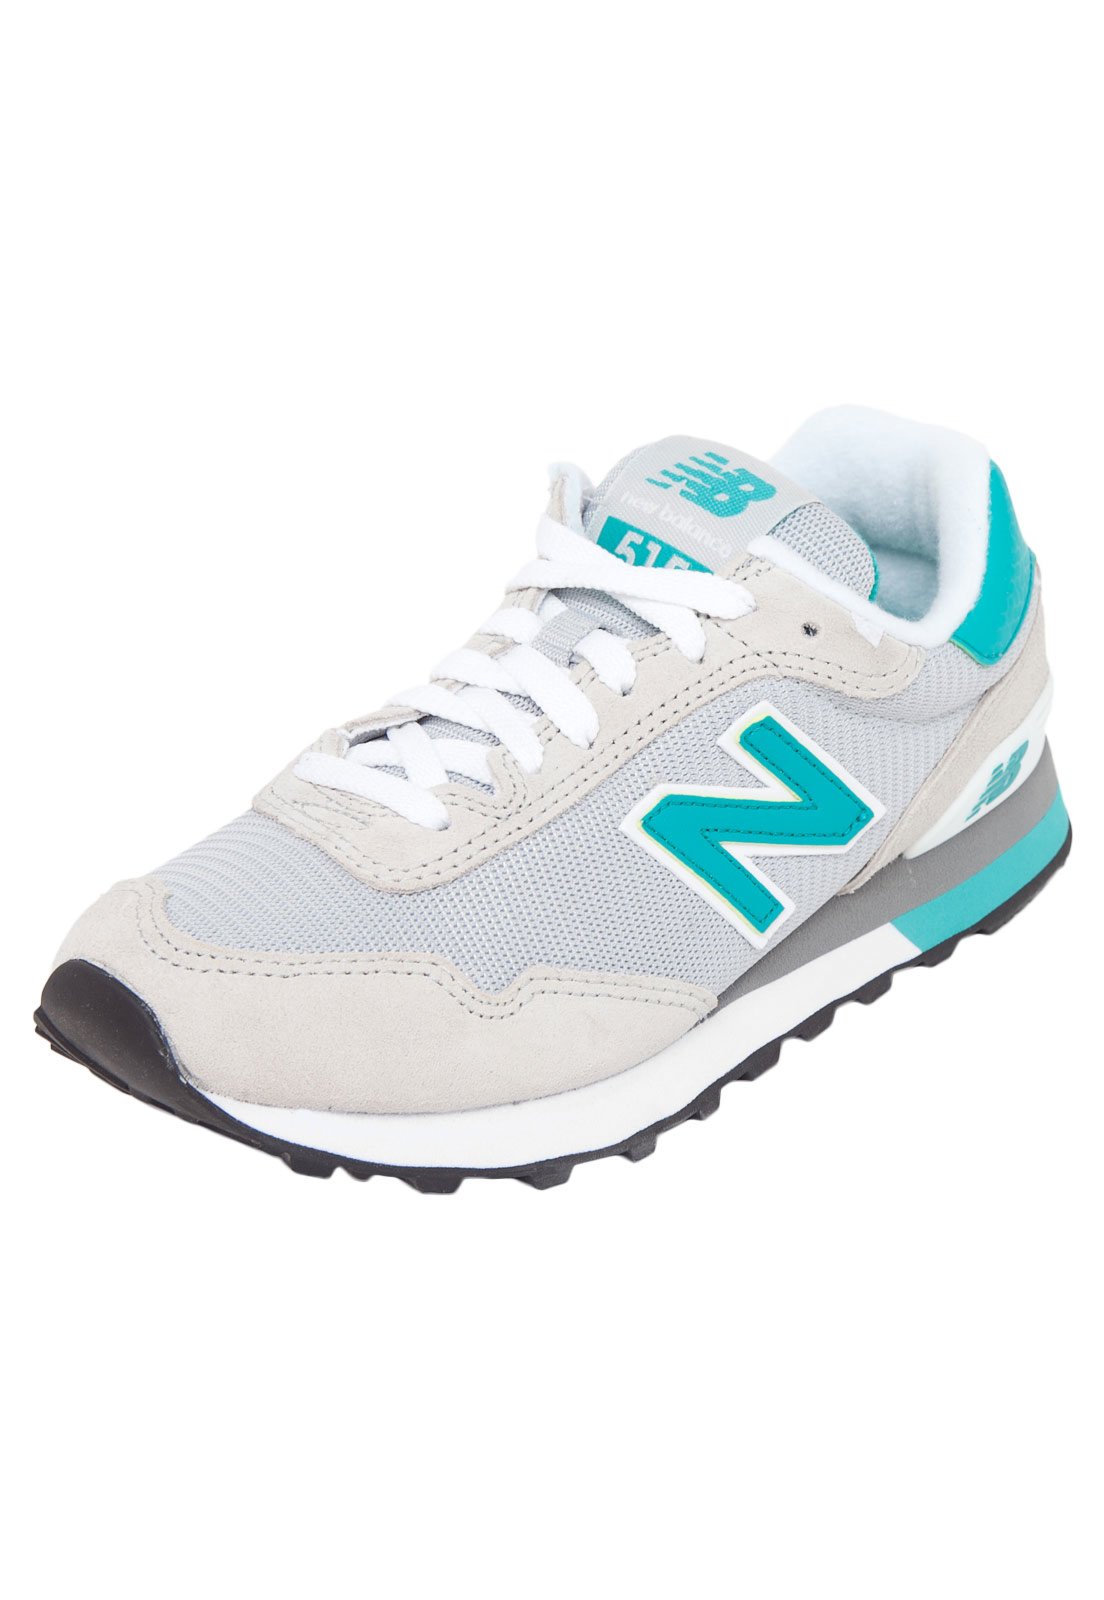 Parity > new balance 515 2017, Up to 79% OFF